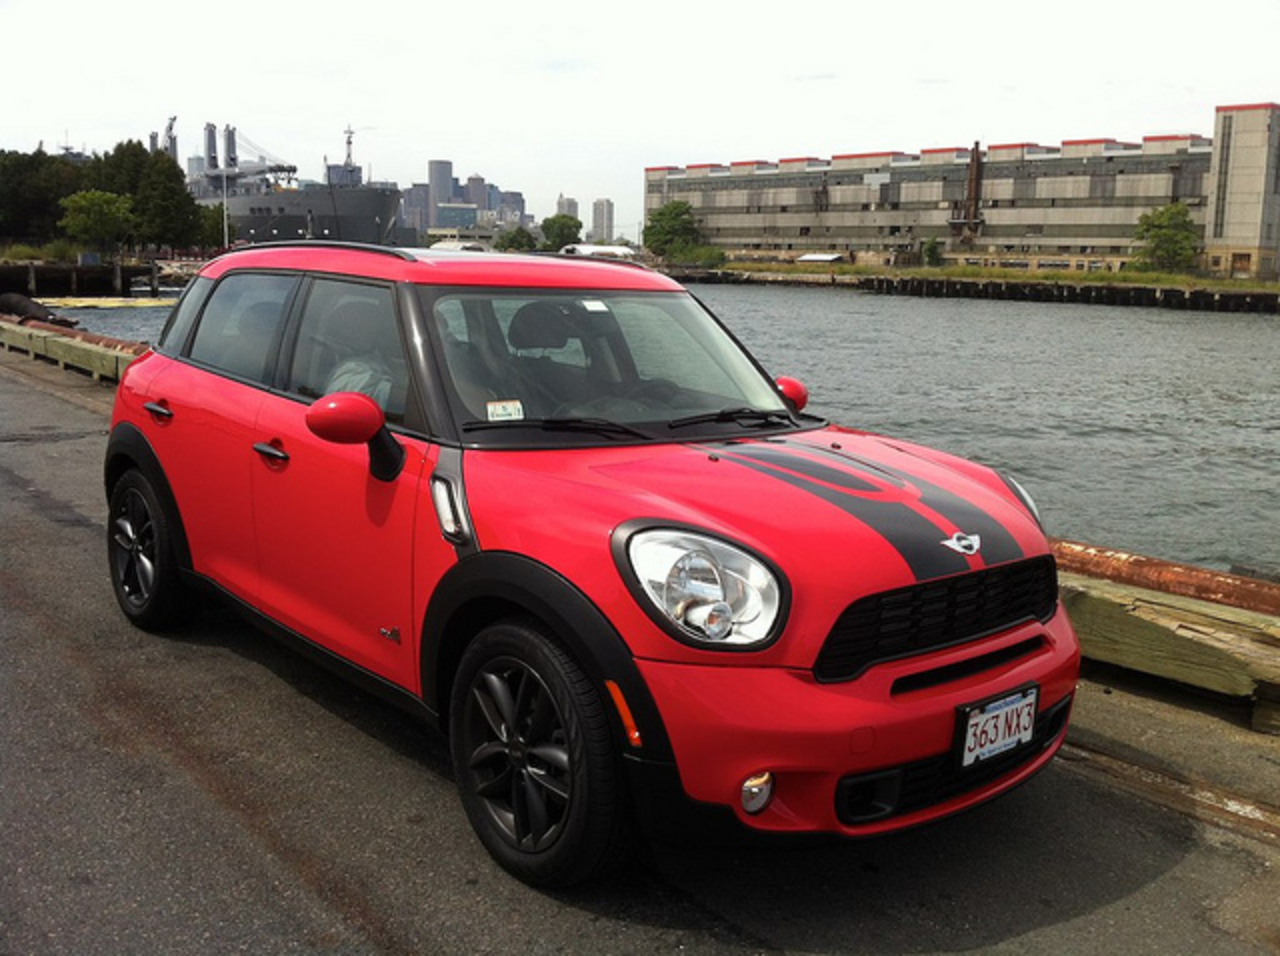 Red MINI Cooper S Countryman All4 | Flickr - Photo Sharing!